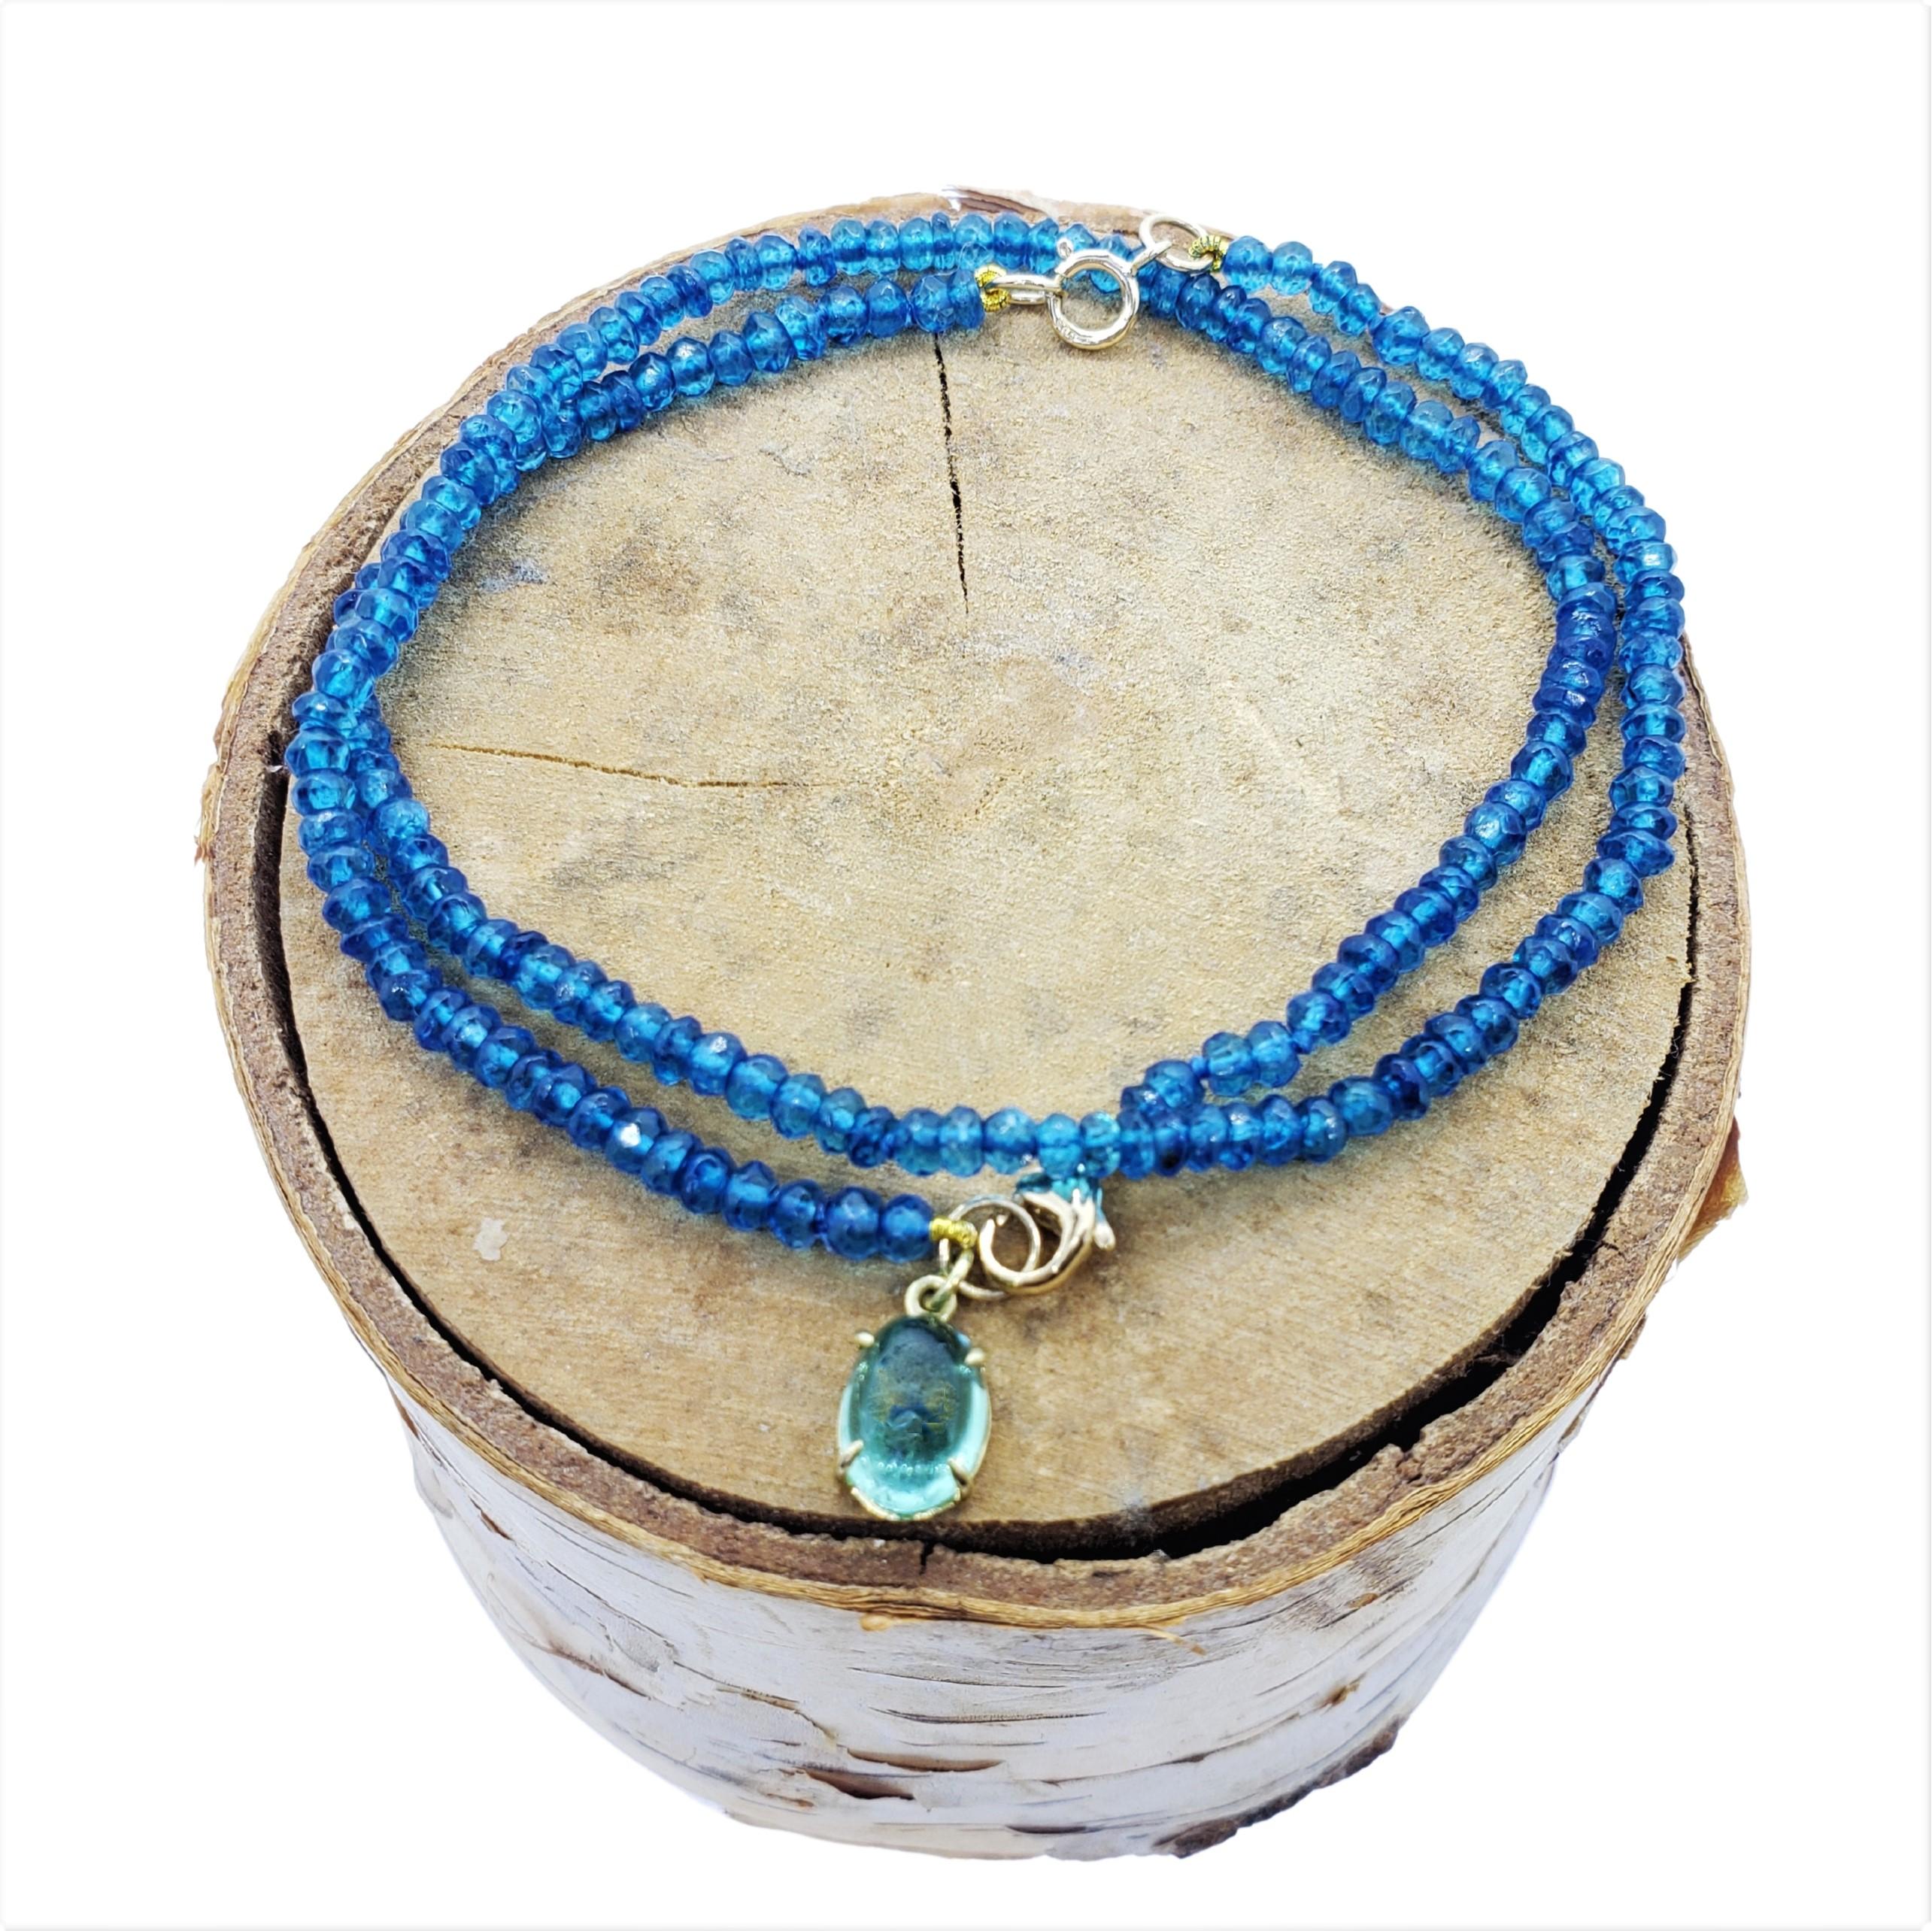 Shades of Blue in this exotic beaded bracelet with Apatite faceted beads and a handmade 18K open setting for the Oval clear Blue Tourmaline cabochon as drop off and 18K lobster clasp to complete the luxurious style. 
A perfect bracelet to stack with